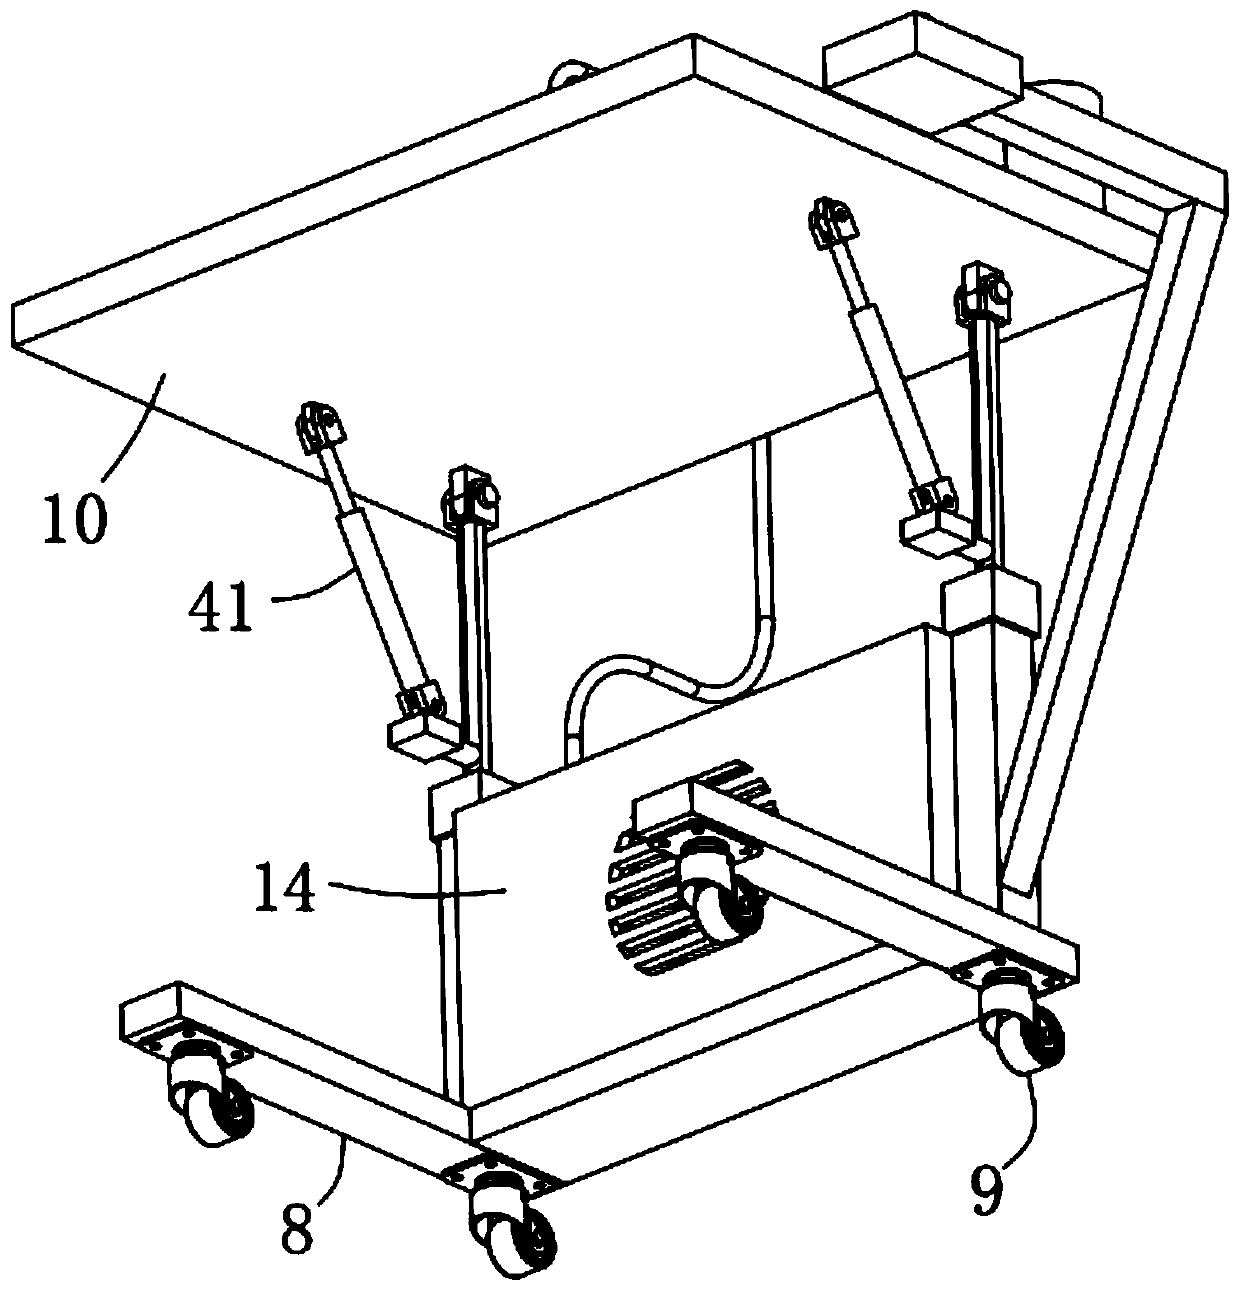 Drawing board frame for drawing urban planning design drawing and using method thereof